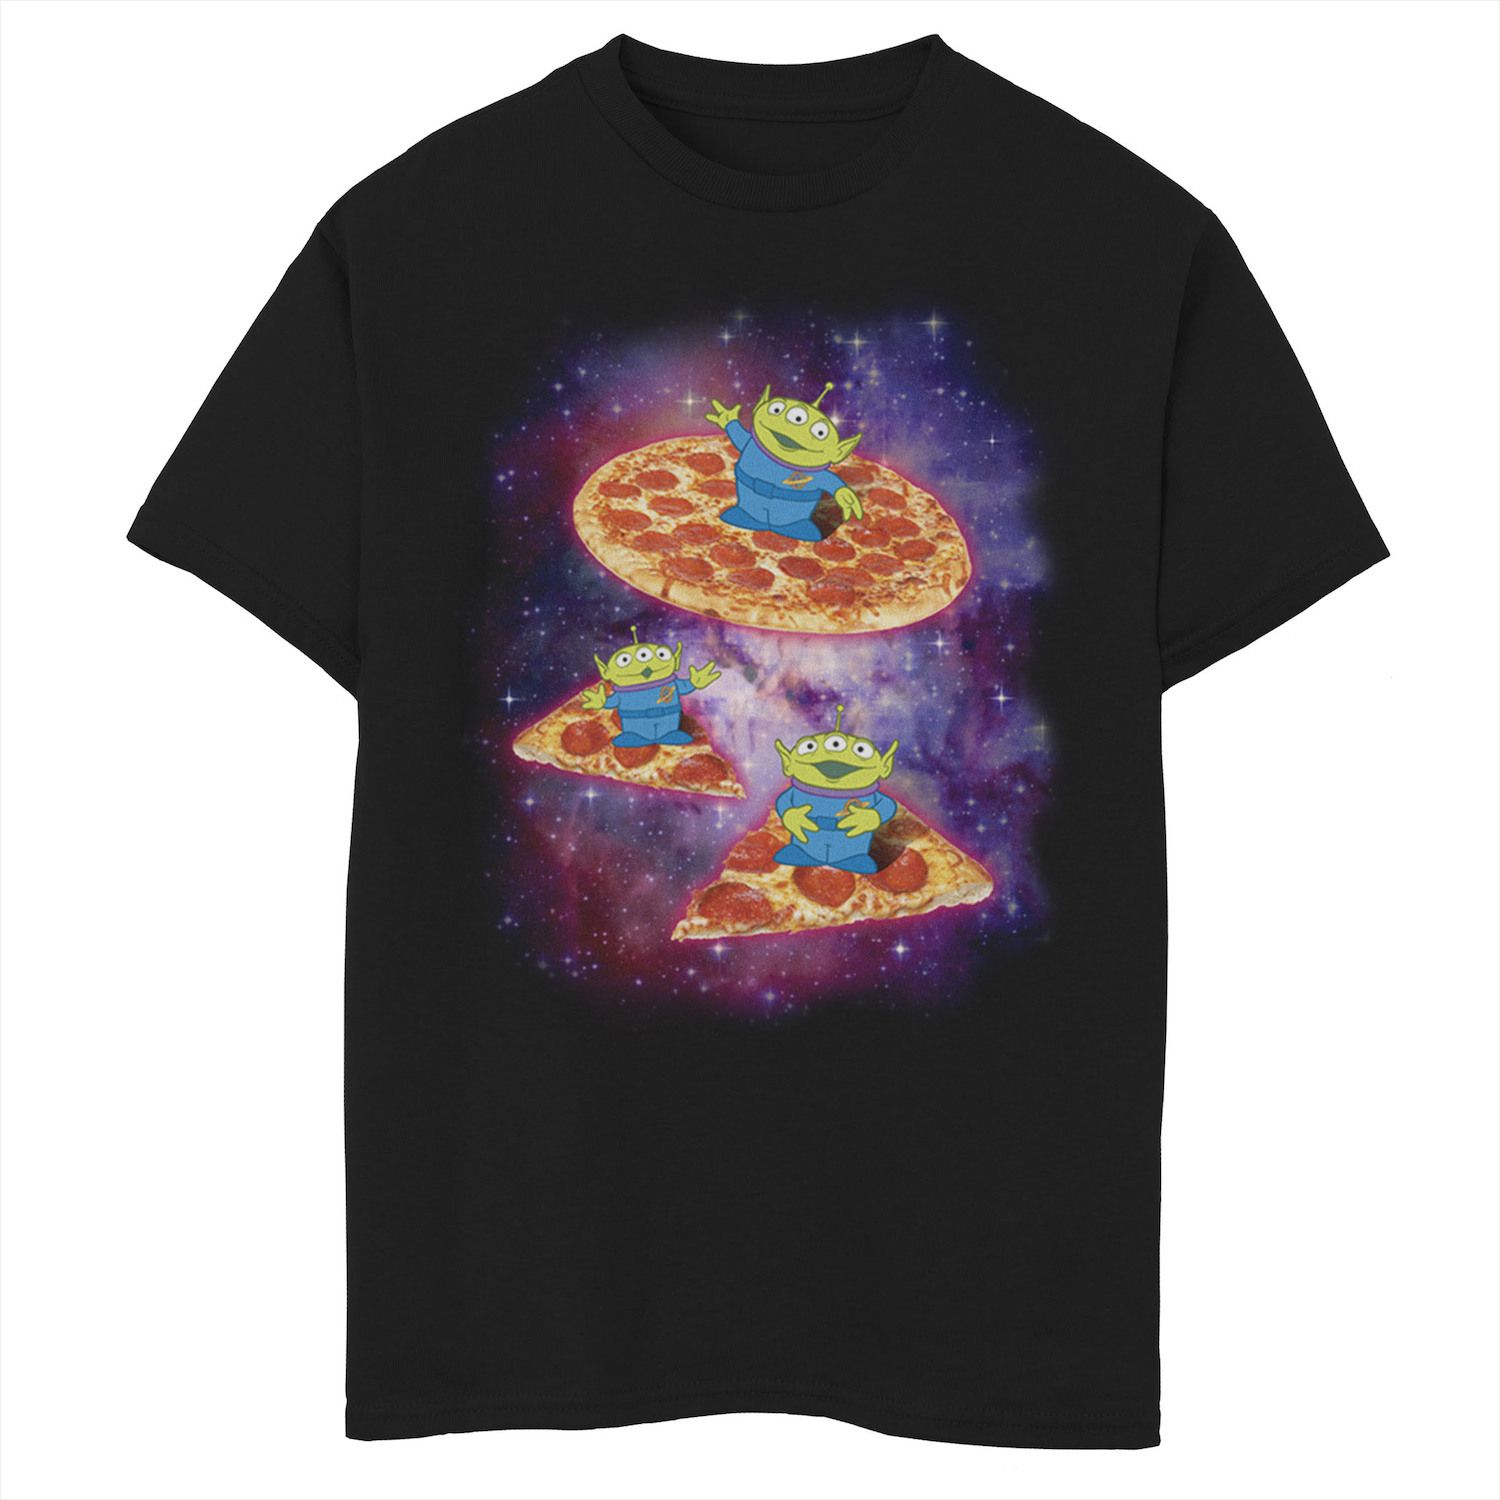 Image for Disney / Pixar 's Toy Story Boys 8-20 Aliens Space Pizza Graphic Tee at Kohl's.